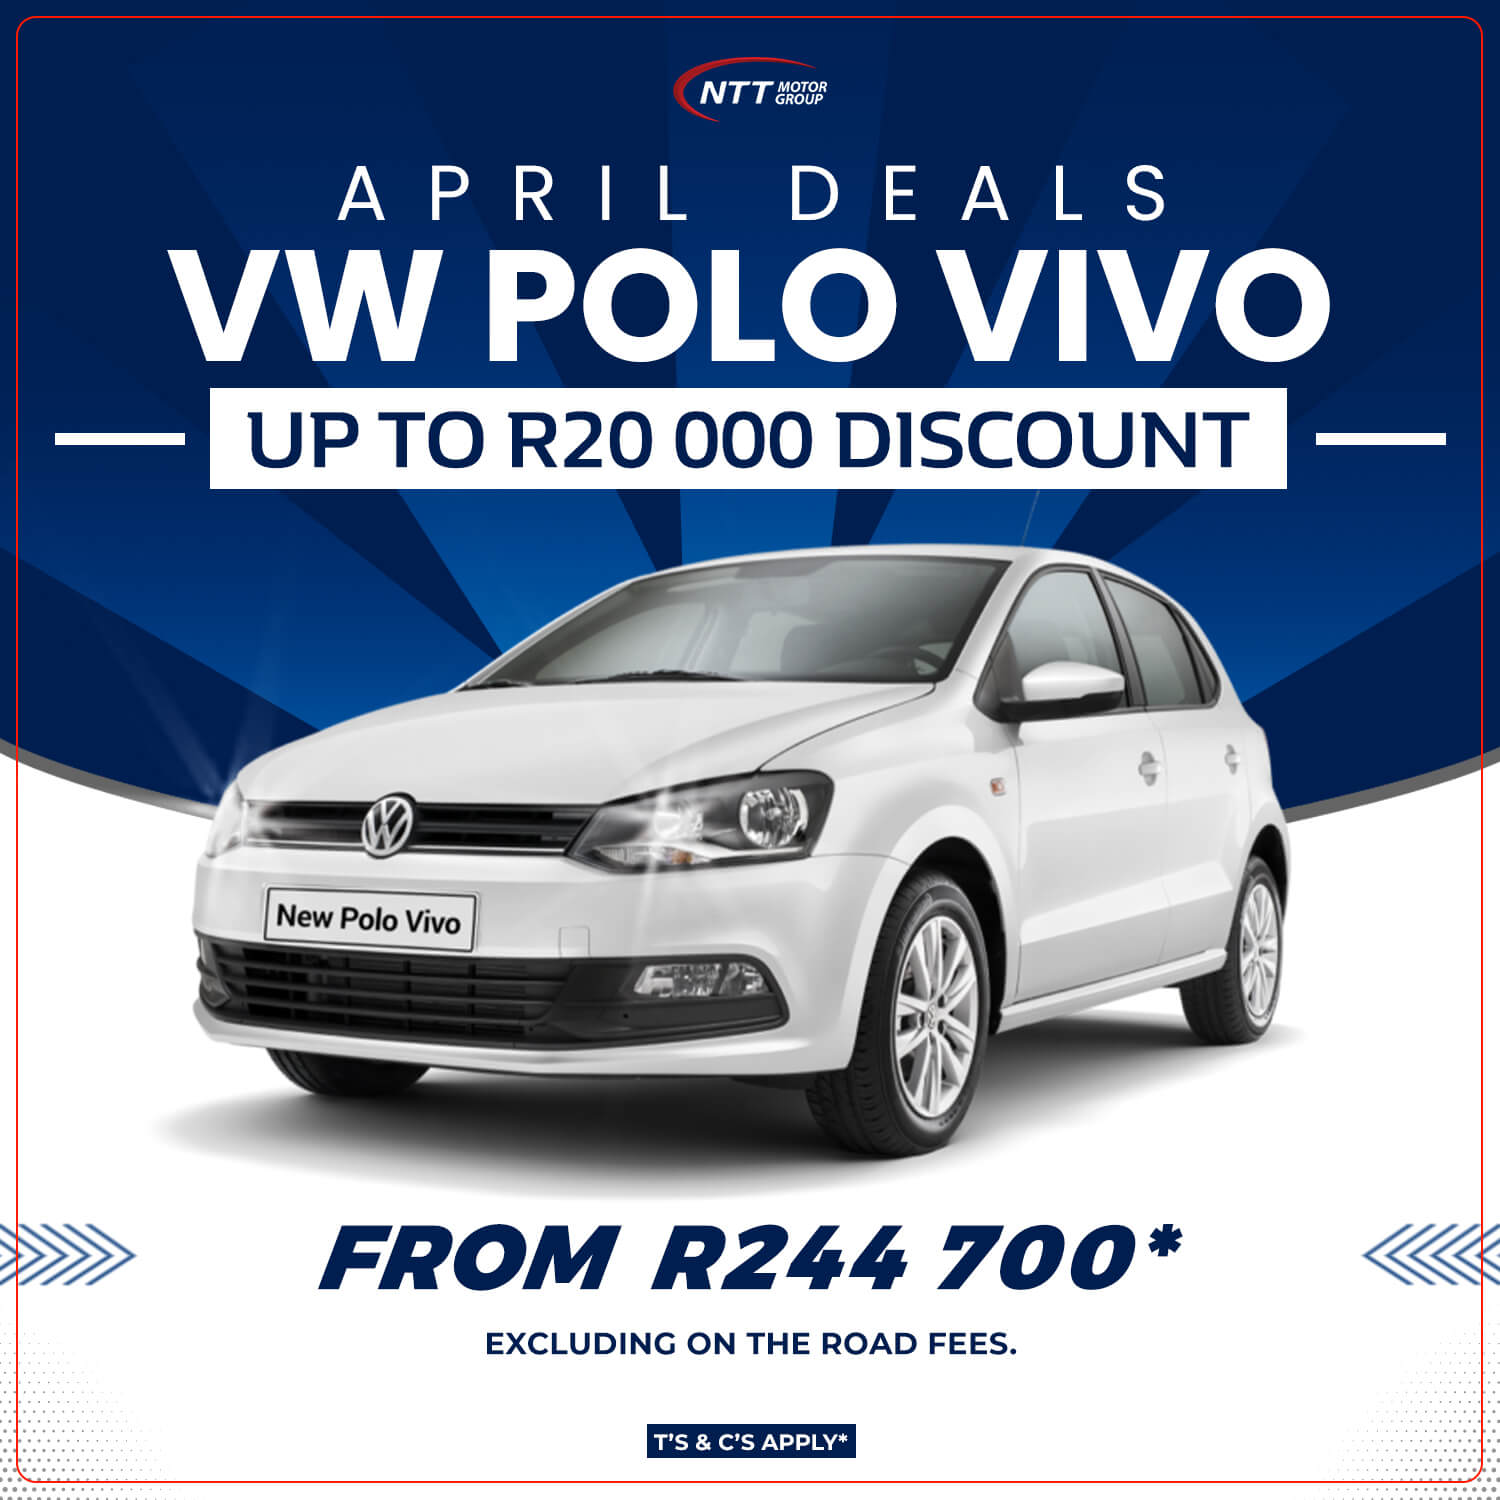 VW POLO VIVO - NTT Volkswagen - New, Used & Demo Cars for Sale in South Africa